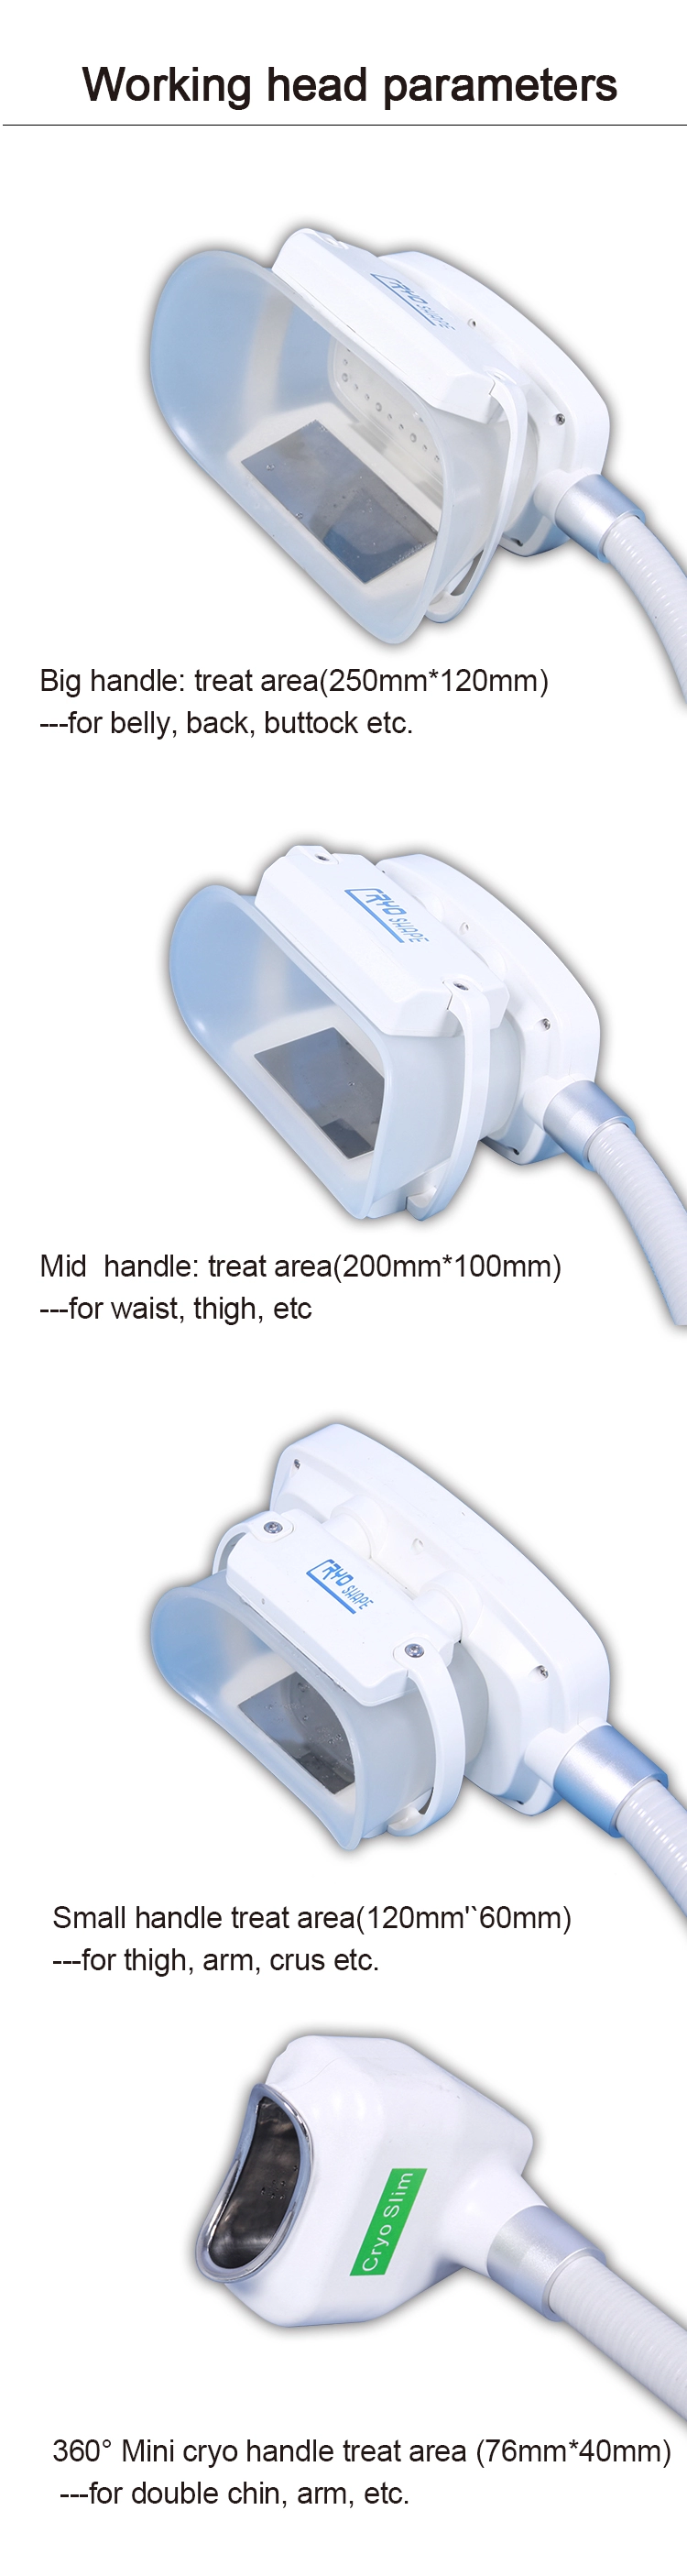 Advanced Cryolipolyse Fat Freezing Cool Therapy Sculpting Machine